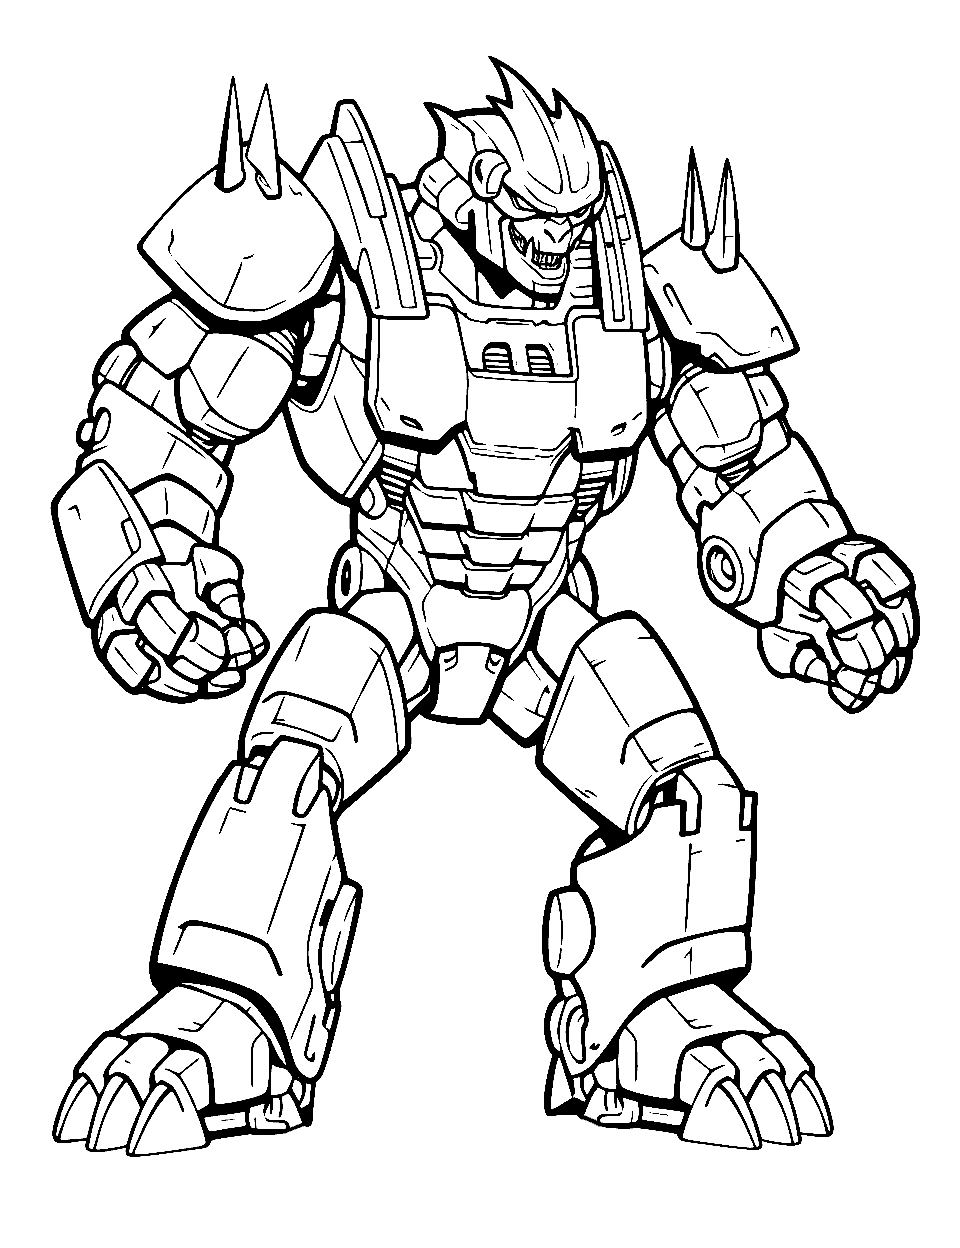 Mecha Design Coloring Page - A Godzilla inspired mecha suit design.